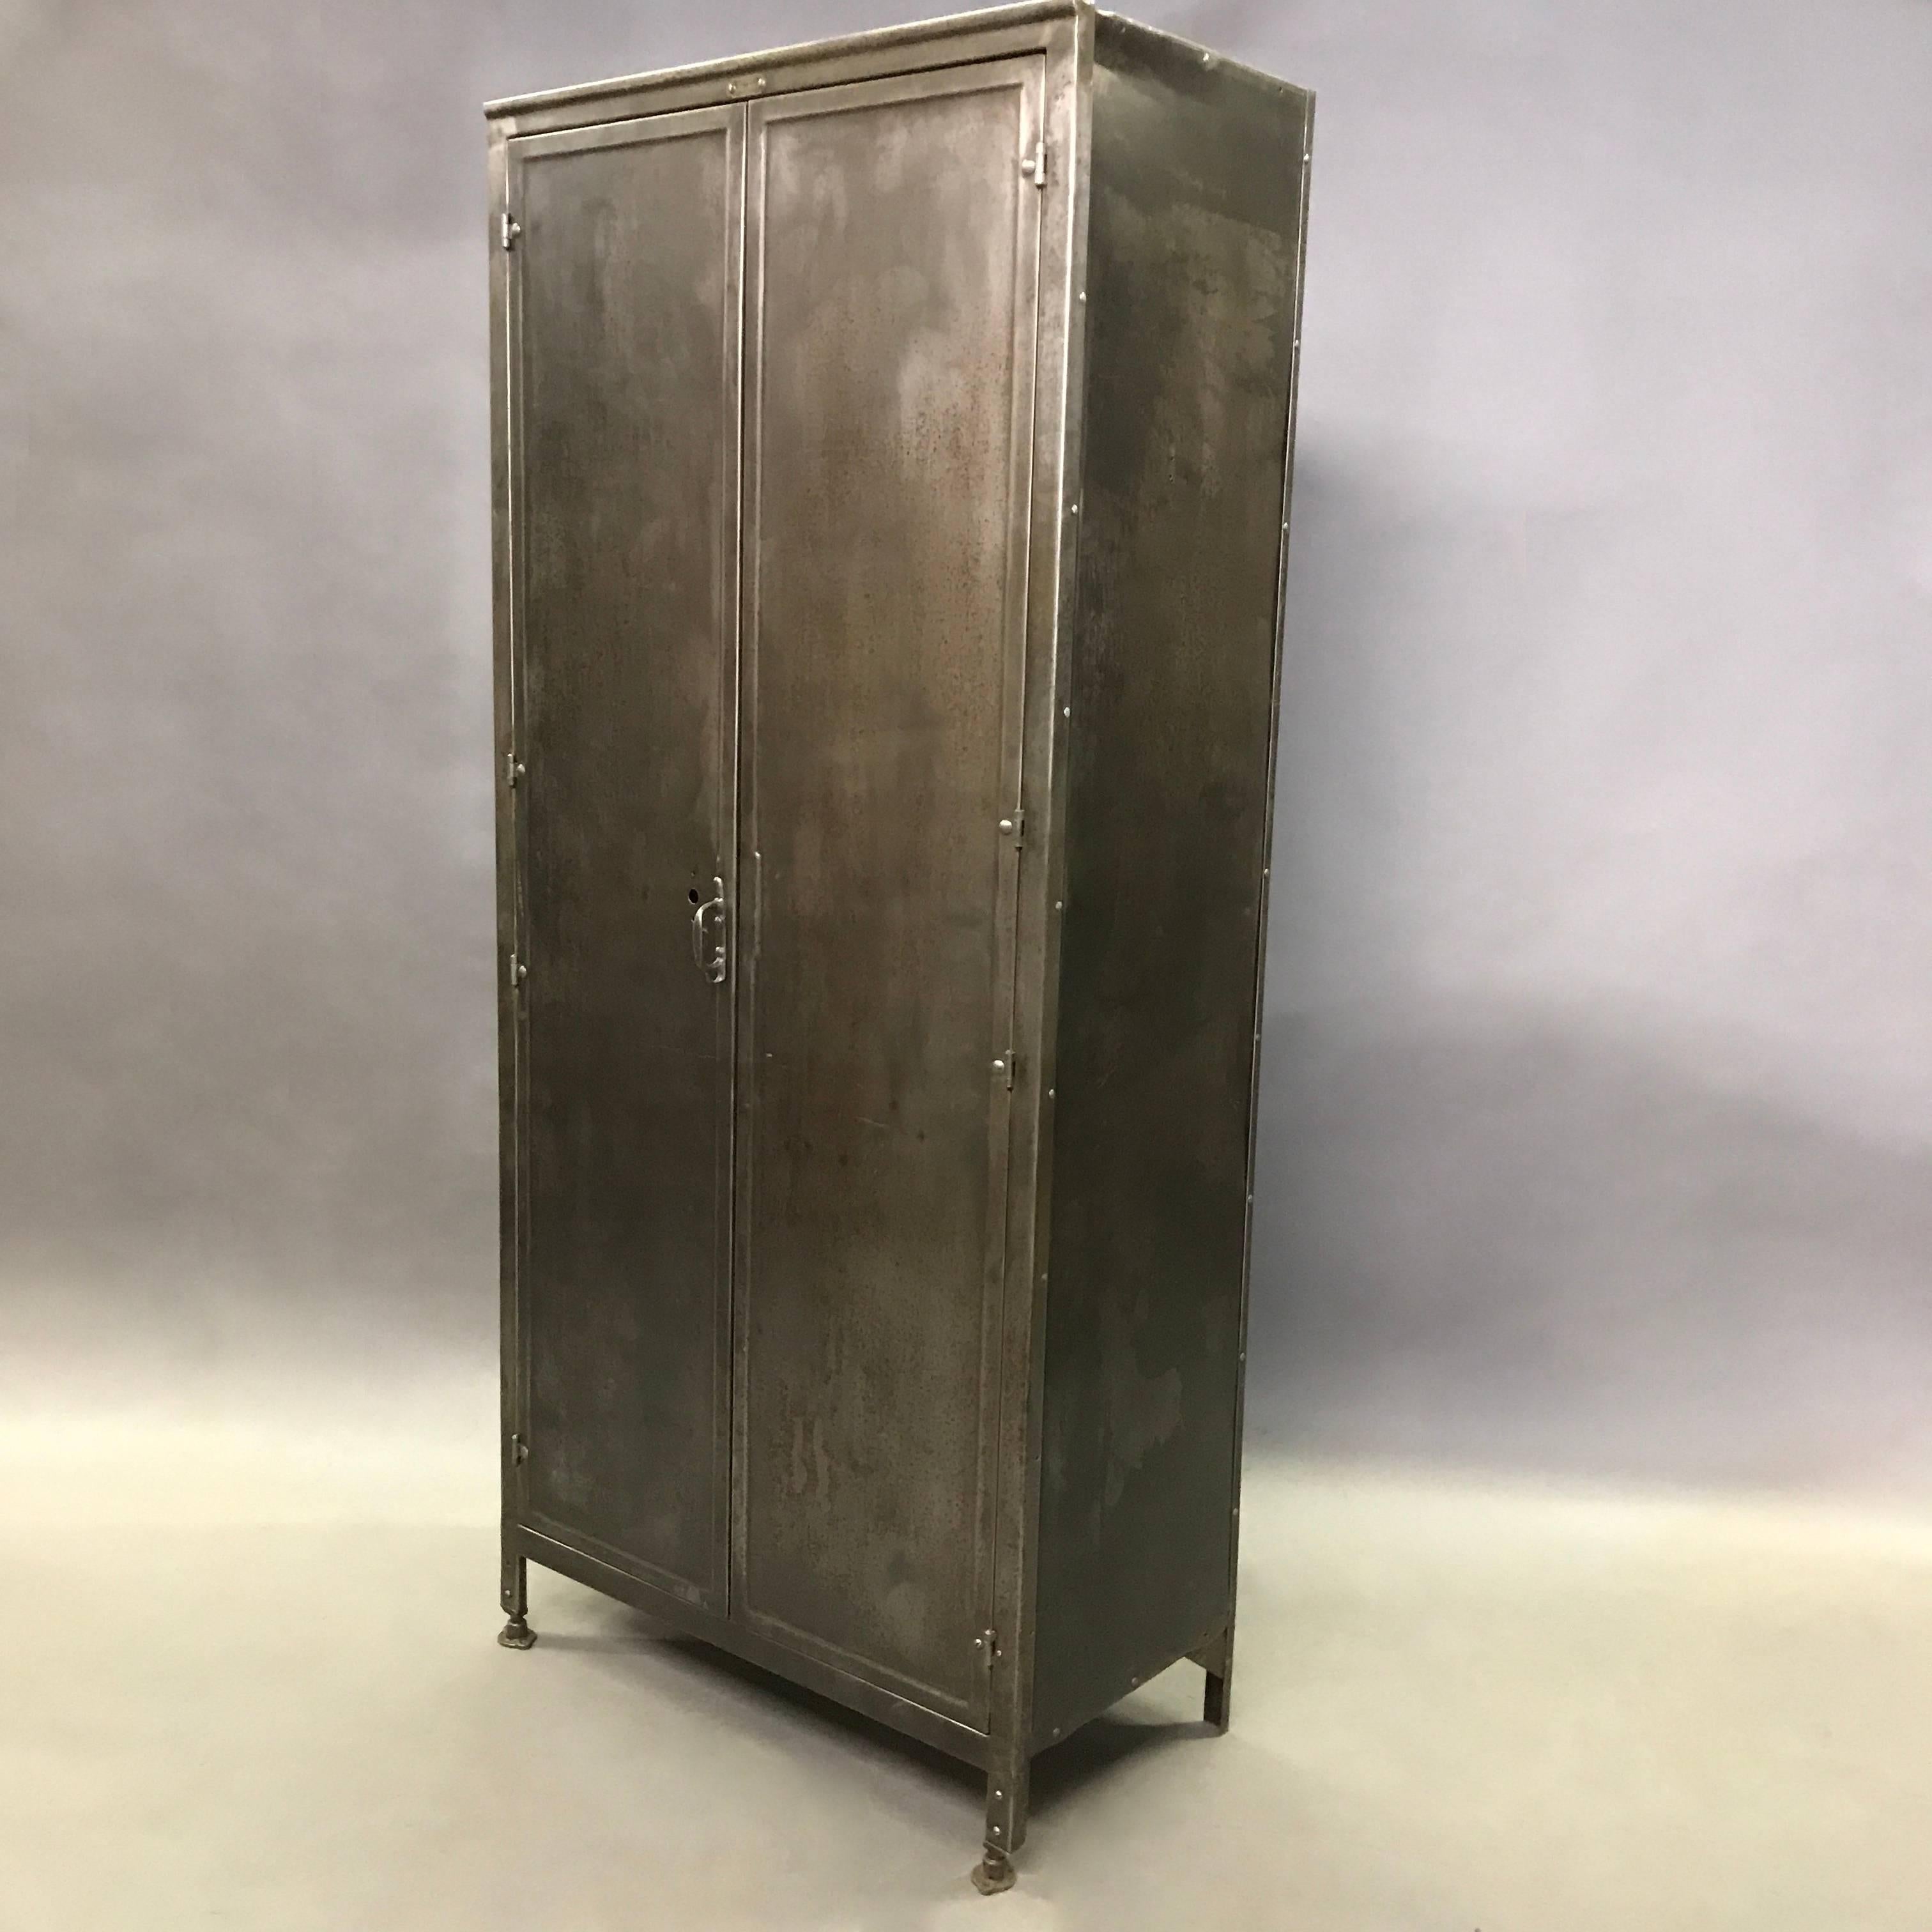 Industrial, double door, brushed steel cabinet by Medart Steelbilt St Louis can be used as a wardrobe or armoire. The interior is contrasted with it's original deep green paint.